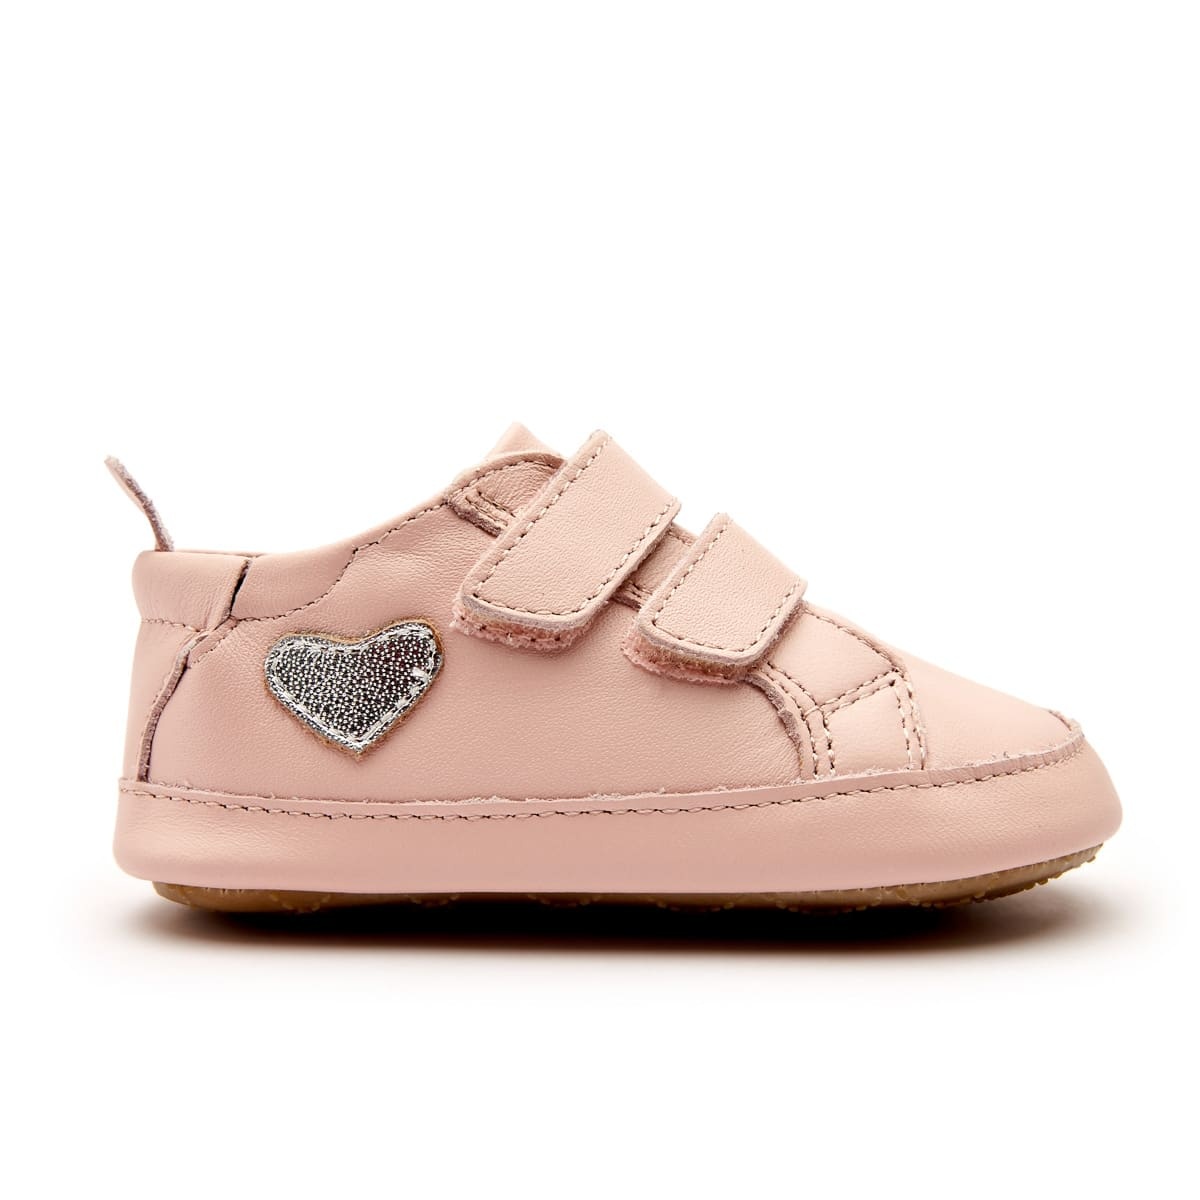 Oldsoles Oldsoles 0048R Love-Ly Powder Pink/Silver